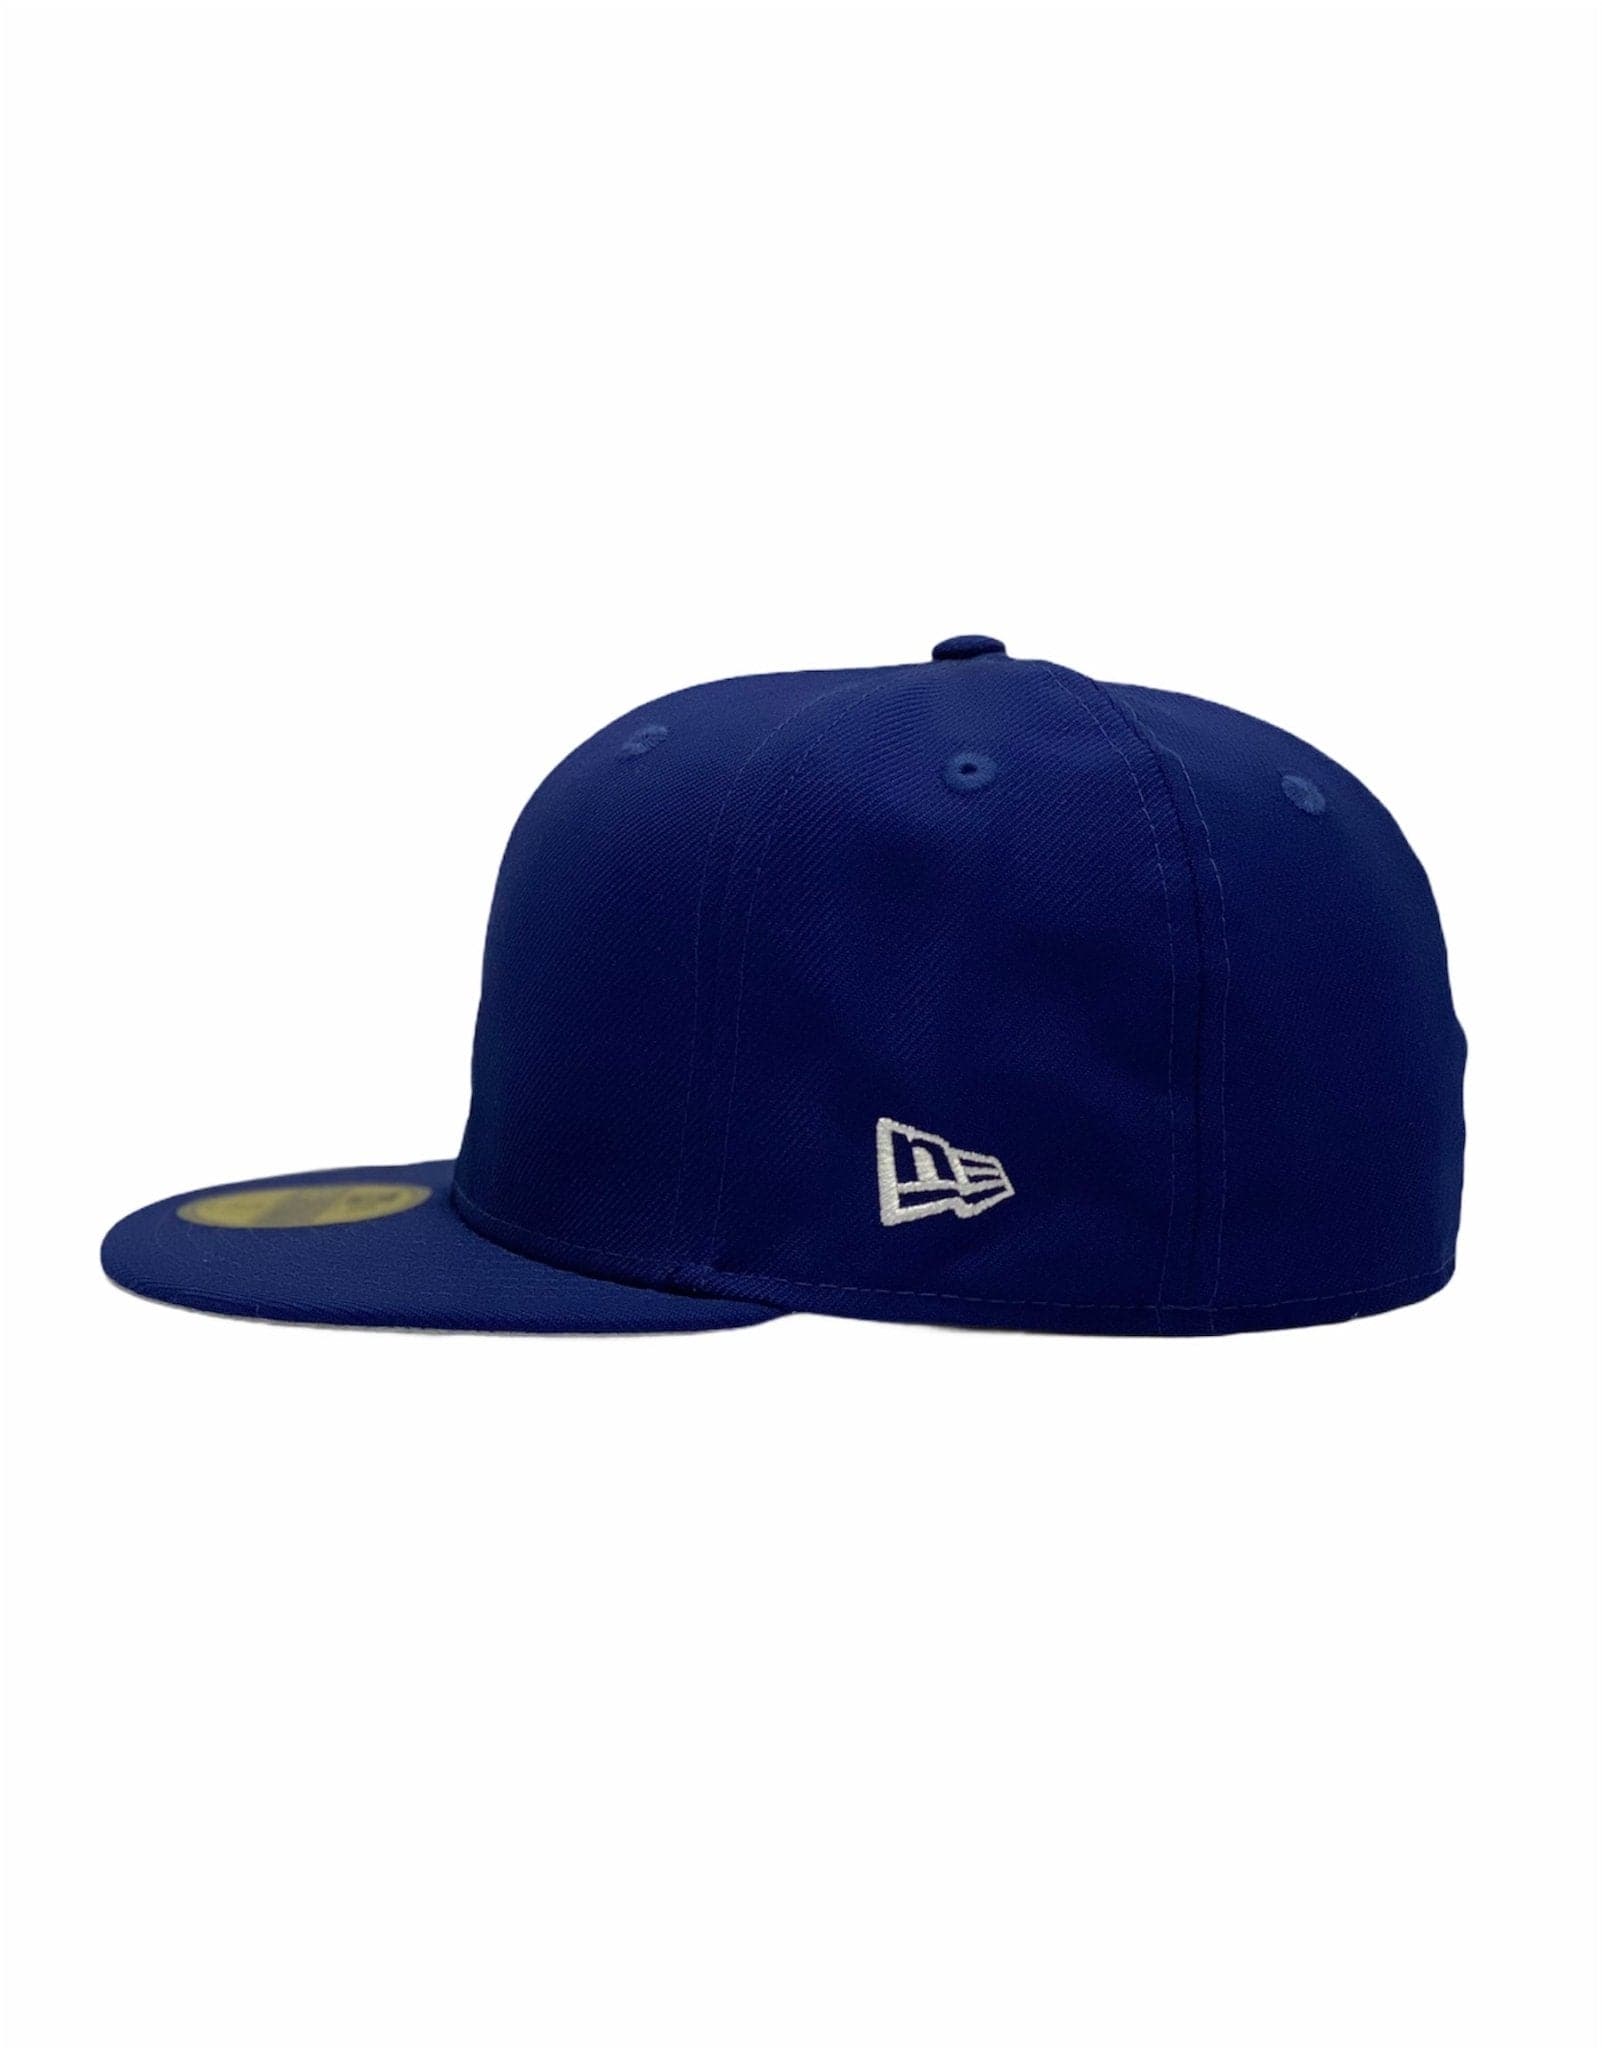 NEW ERA - 59FIFTY LOS ANGELES "DODGERS" 1988 WS FITTED (ROYAL) - The Magnolia Park